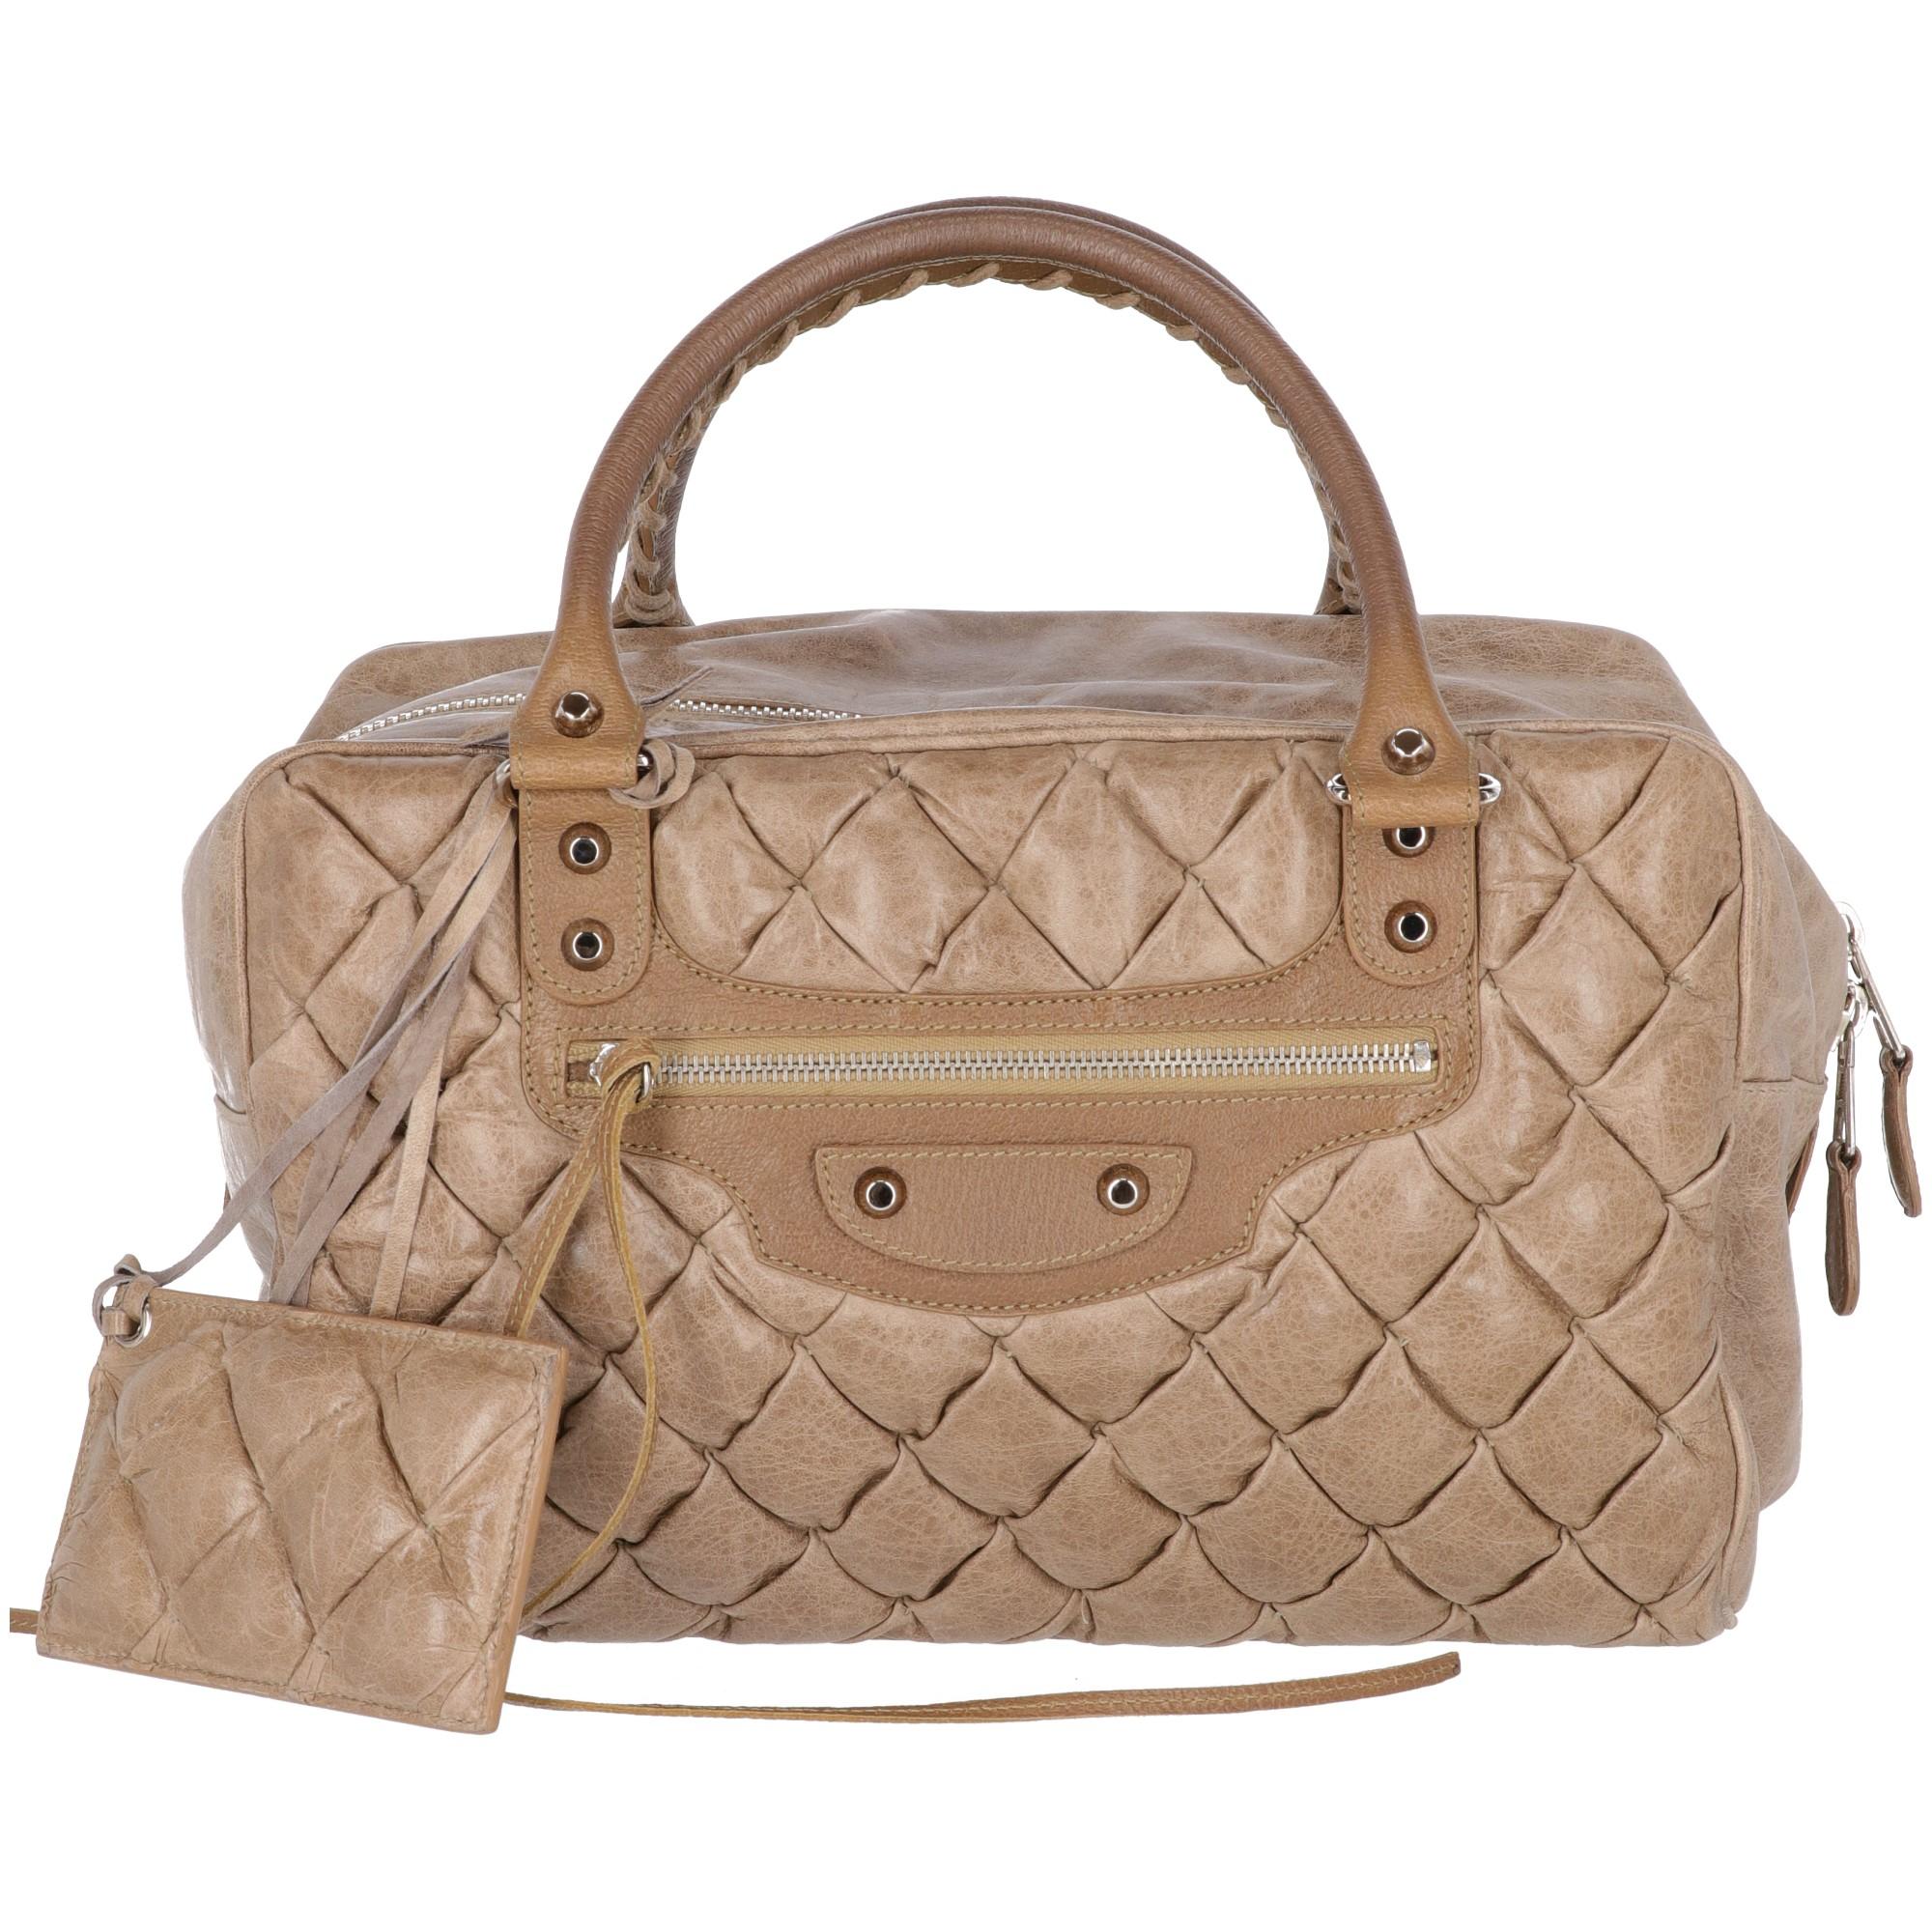 The stylish Balenciaga Motorcycle turtle dove colored real leather quilted handbag features a silver-tone metal zip fastening, a decorative zip with studs on the front and two handles with braided leather strings and silver metal buckles. The lining